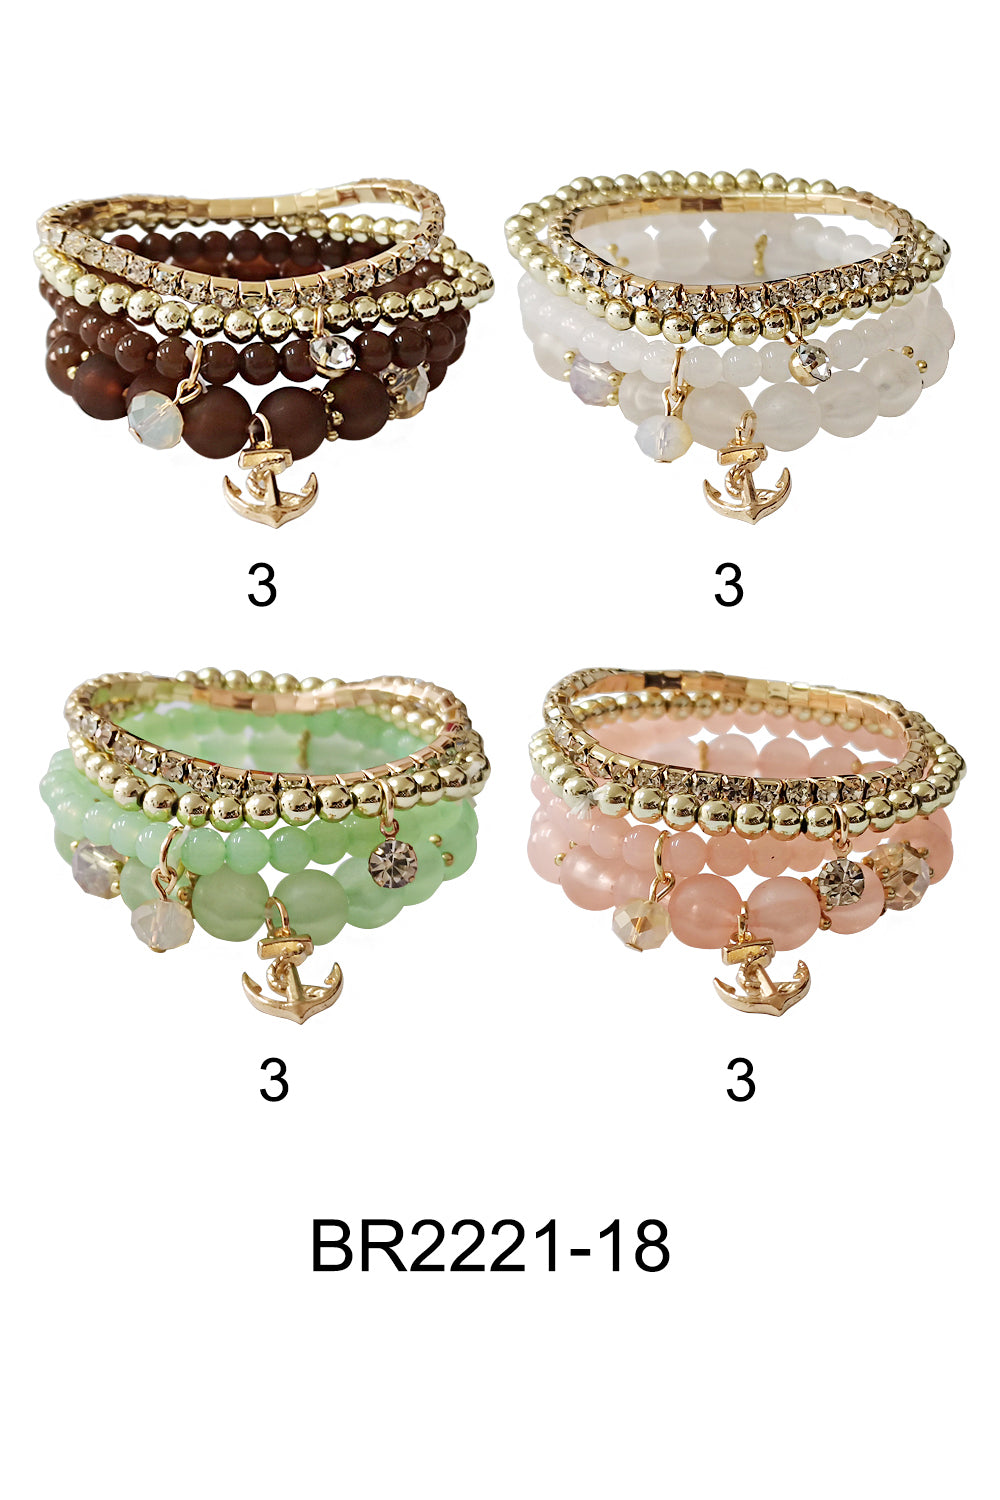 BR2221-18 (12PC)